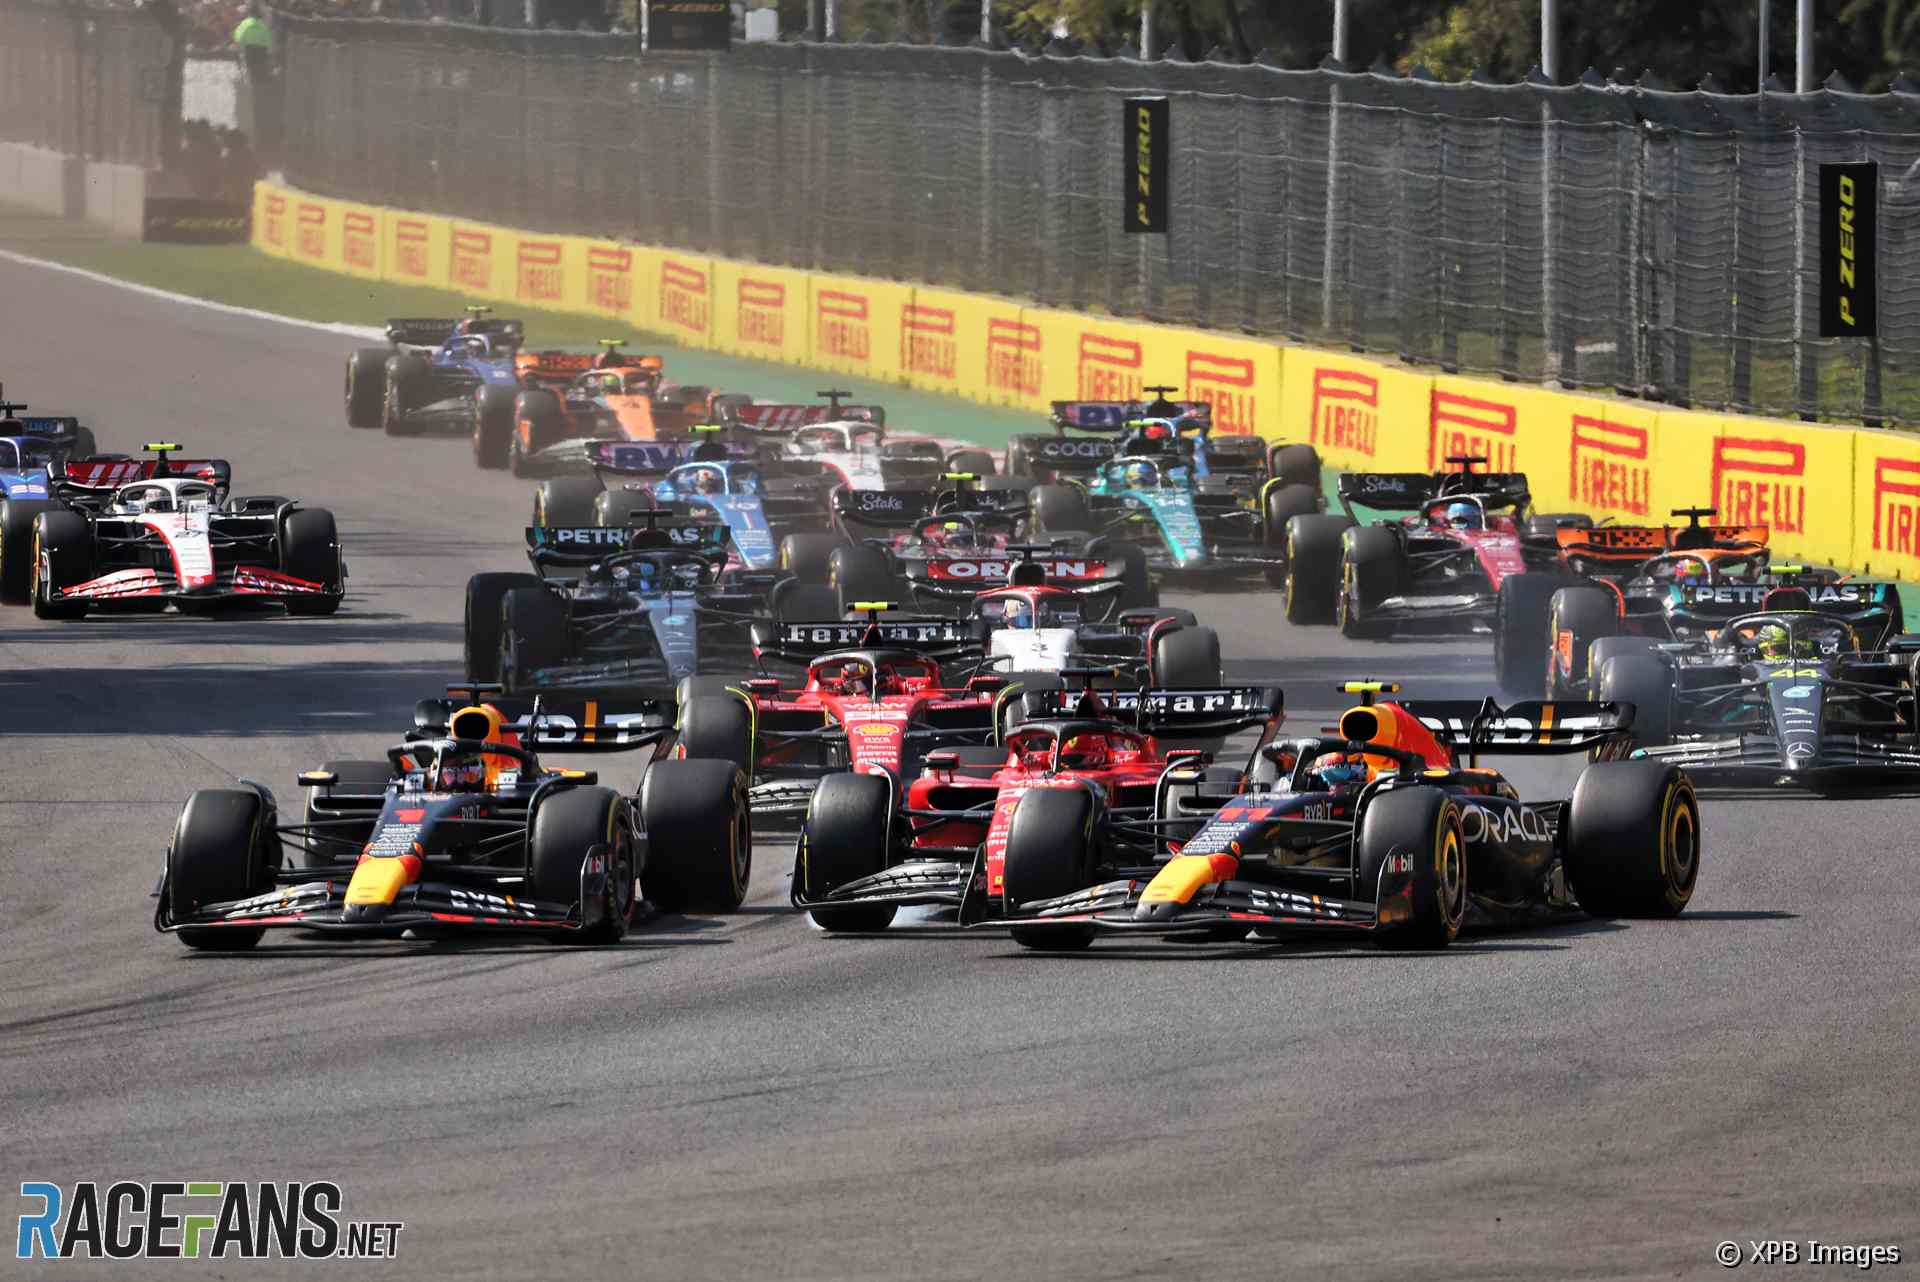 The 2023 Mexican Grand Prix was held at Autodromo Hermanos Rodriguez and won by Max Verstappen